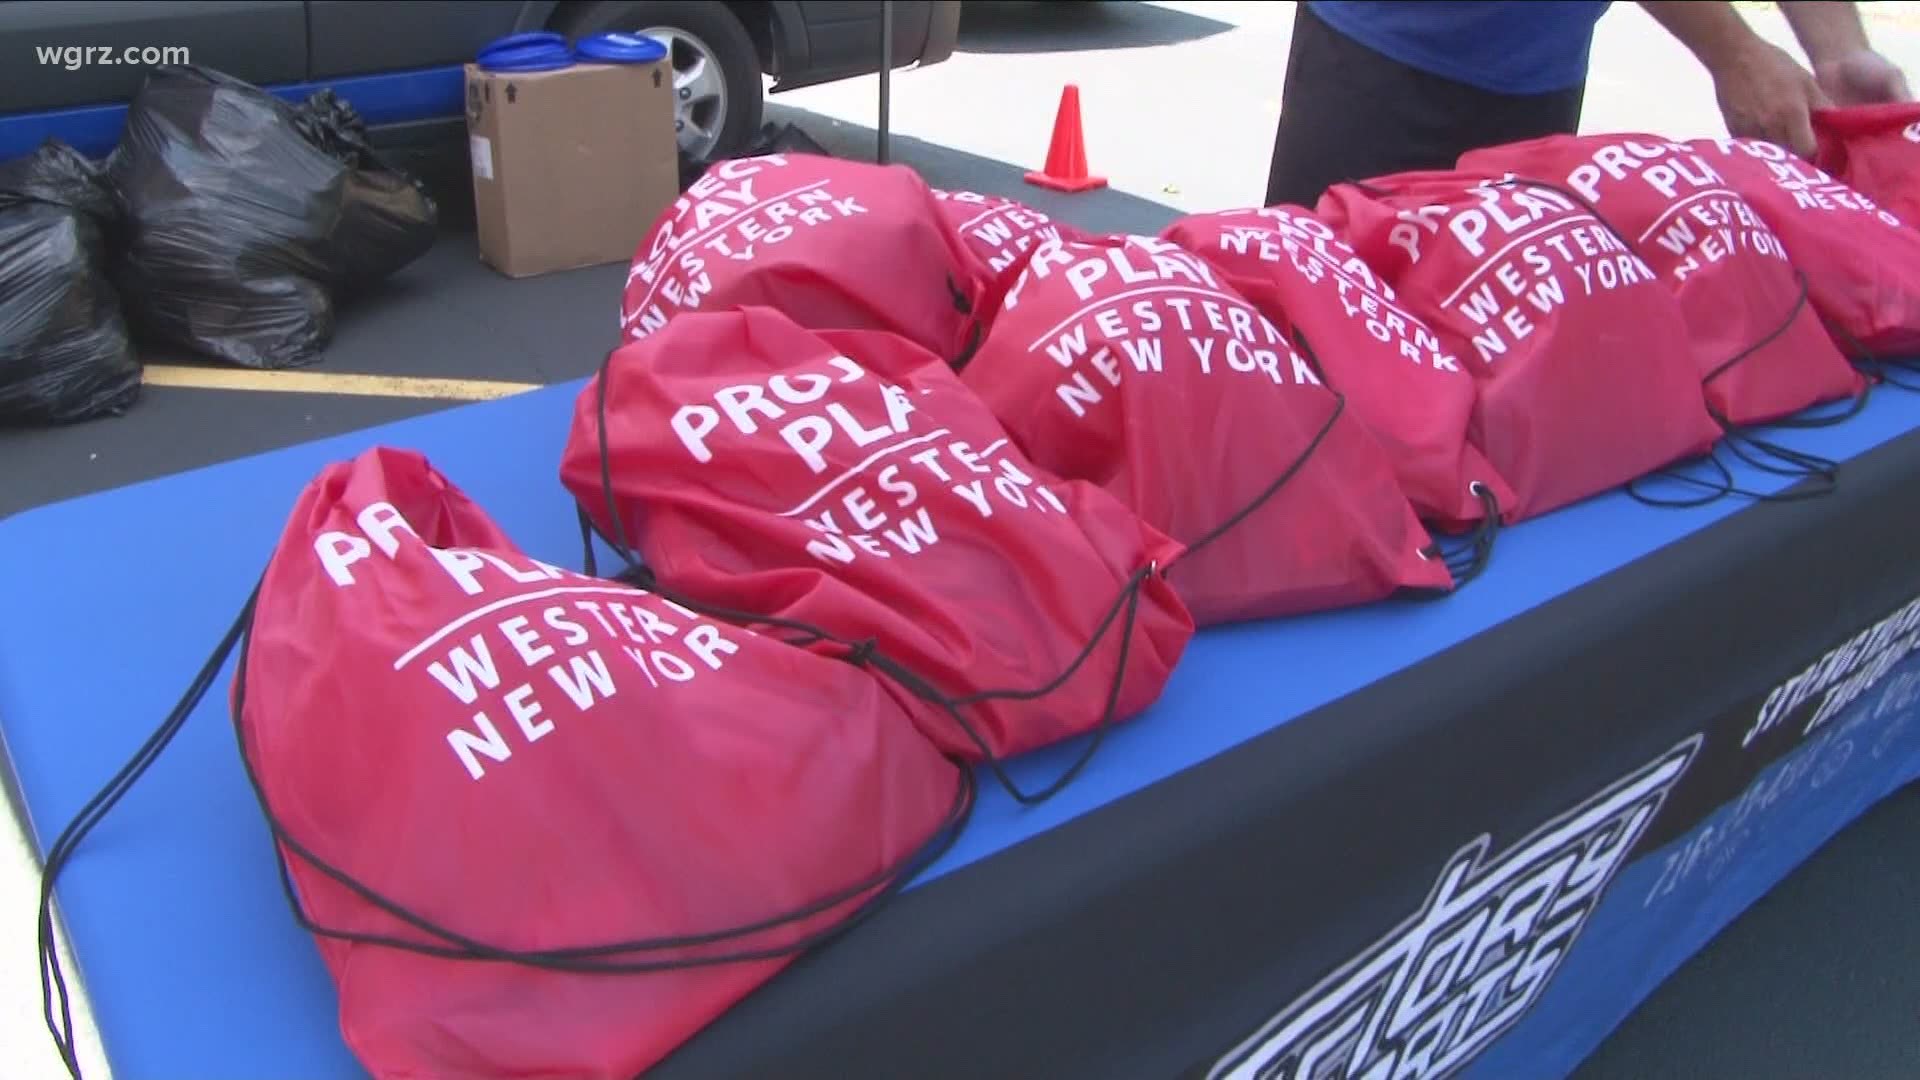 The Allentown Association has partnered with local organizations to pass out summer play packs this weekend. It's part of an initiative to keep young people active.